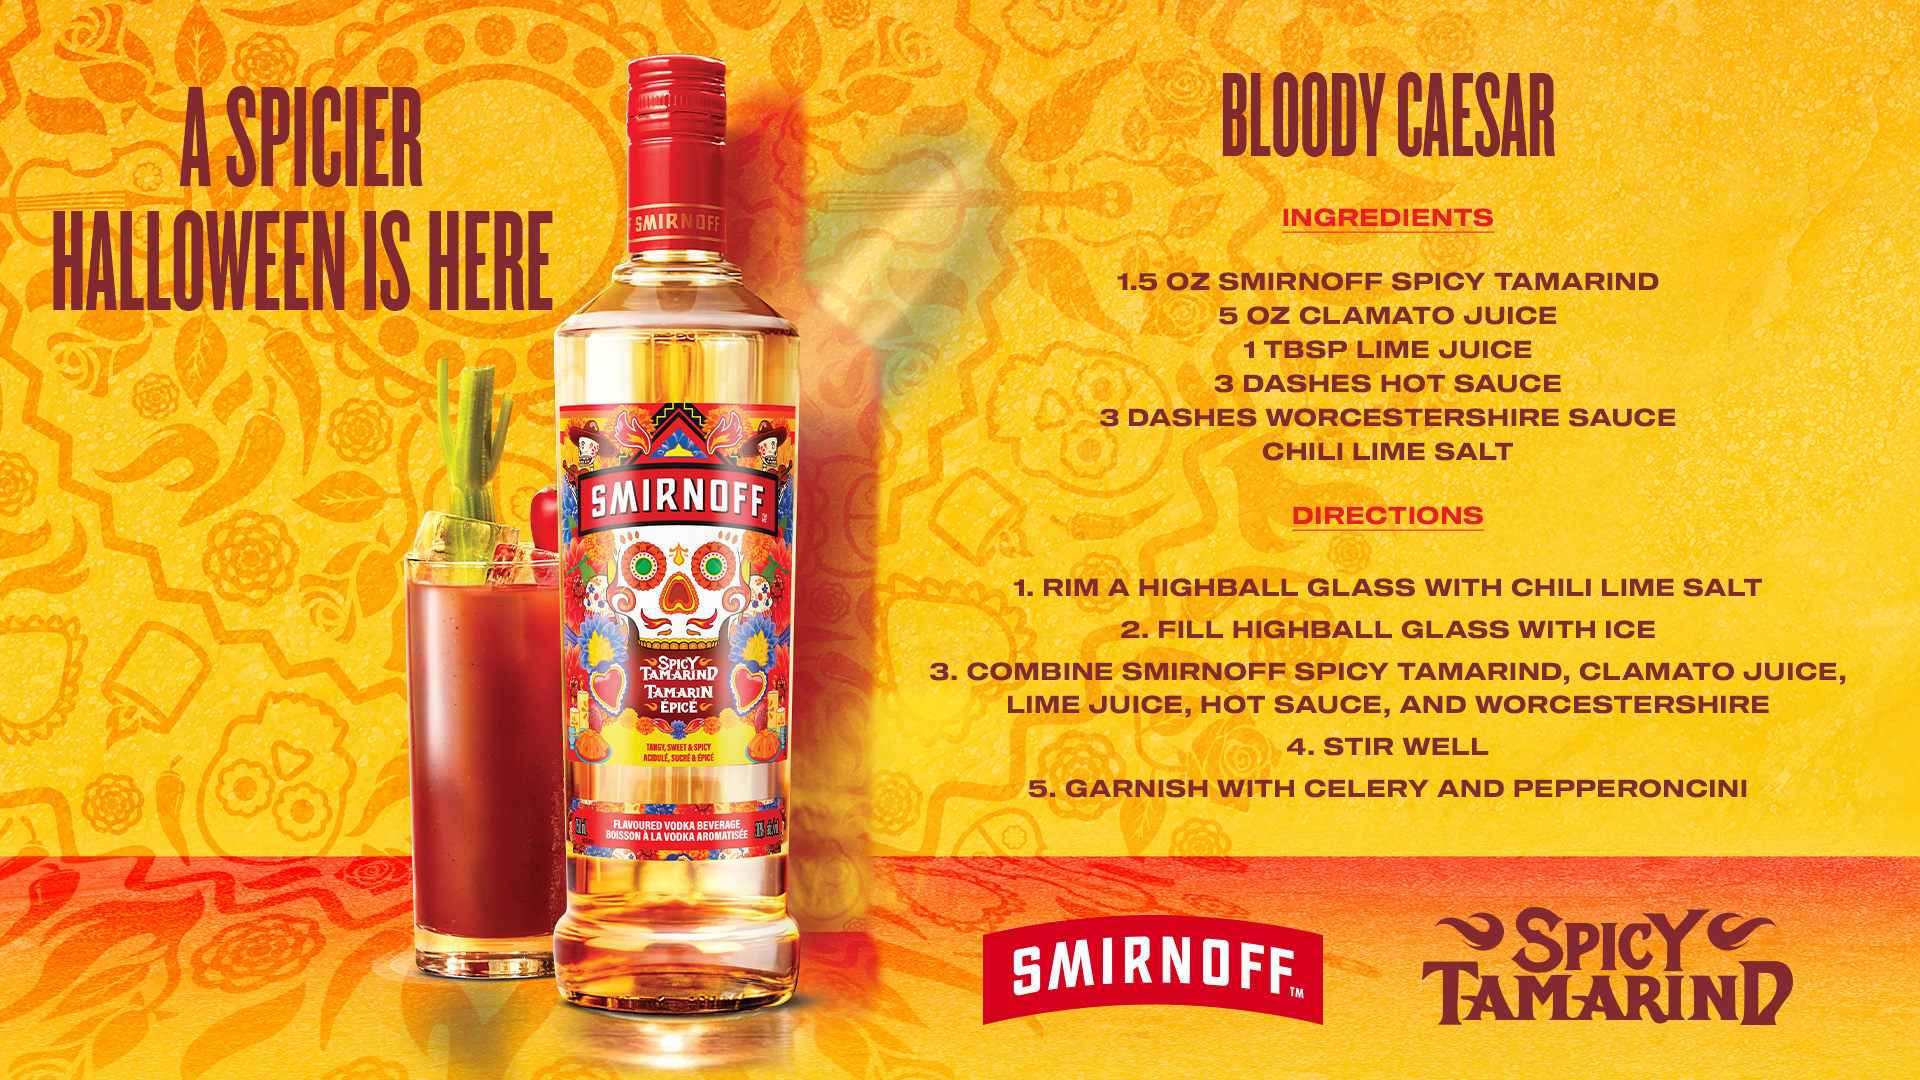 recipe card for bloody caesar: rim highball glass with chil lime salt, fill glass with ice, combine smirnoff spicy tamarind, clamato juice, lime juice, hot sauce and worcestershire, stir well